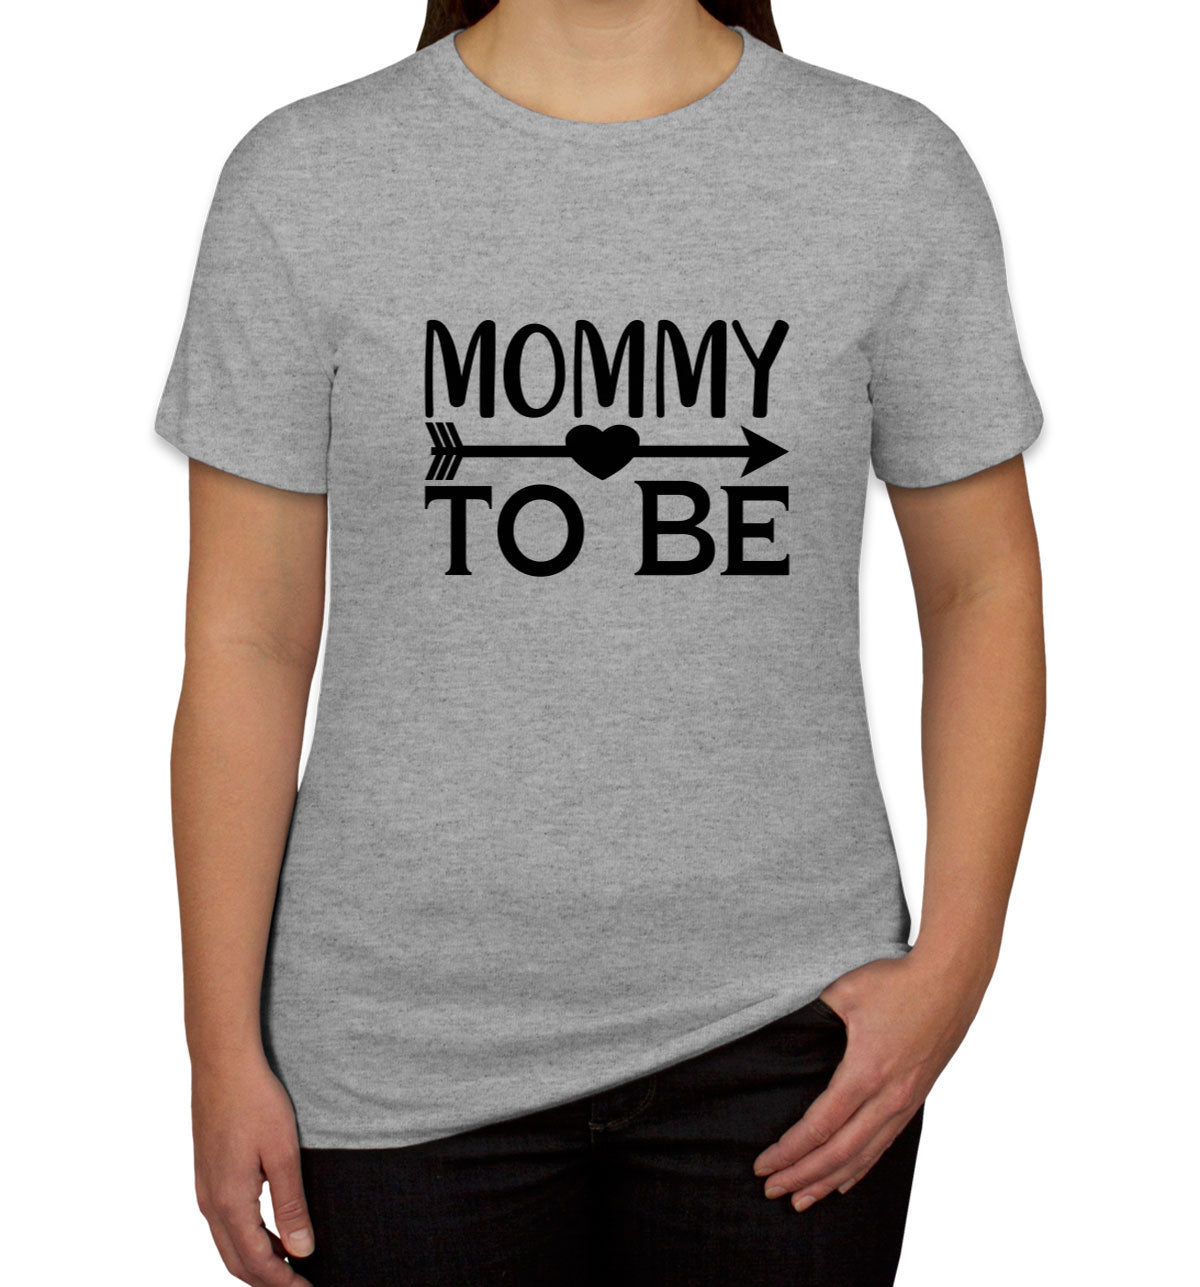 Mommy To Be Women's T-shirt